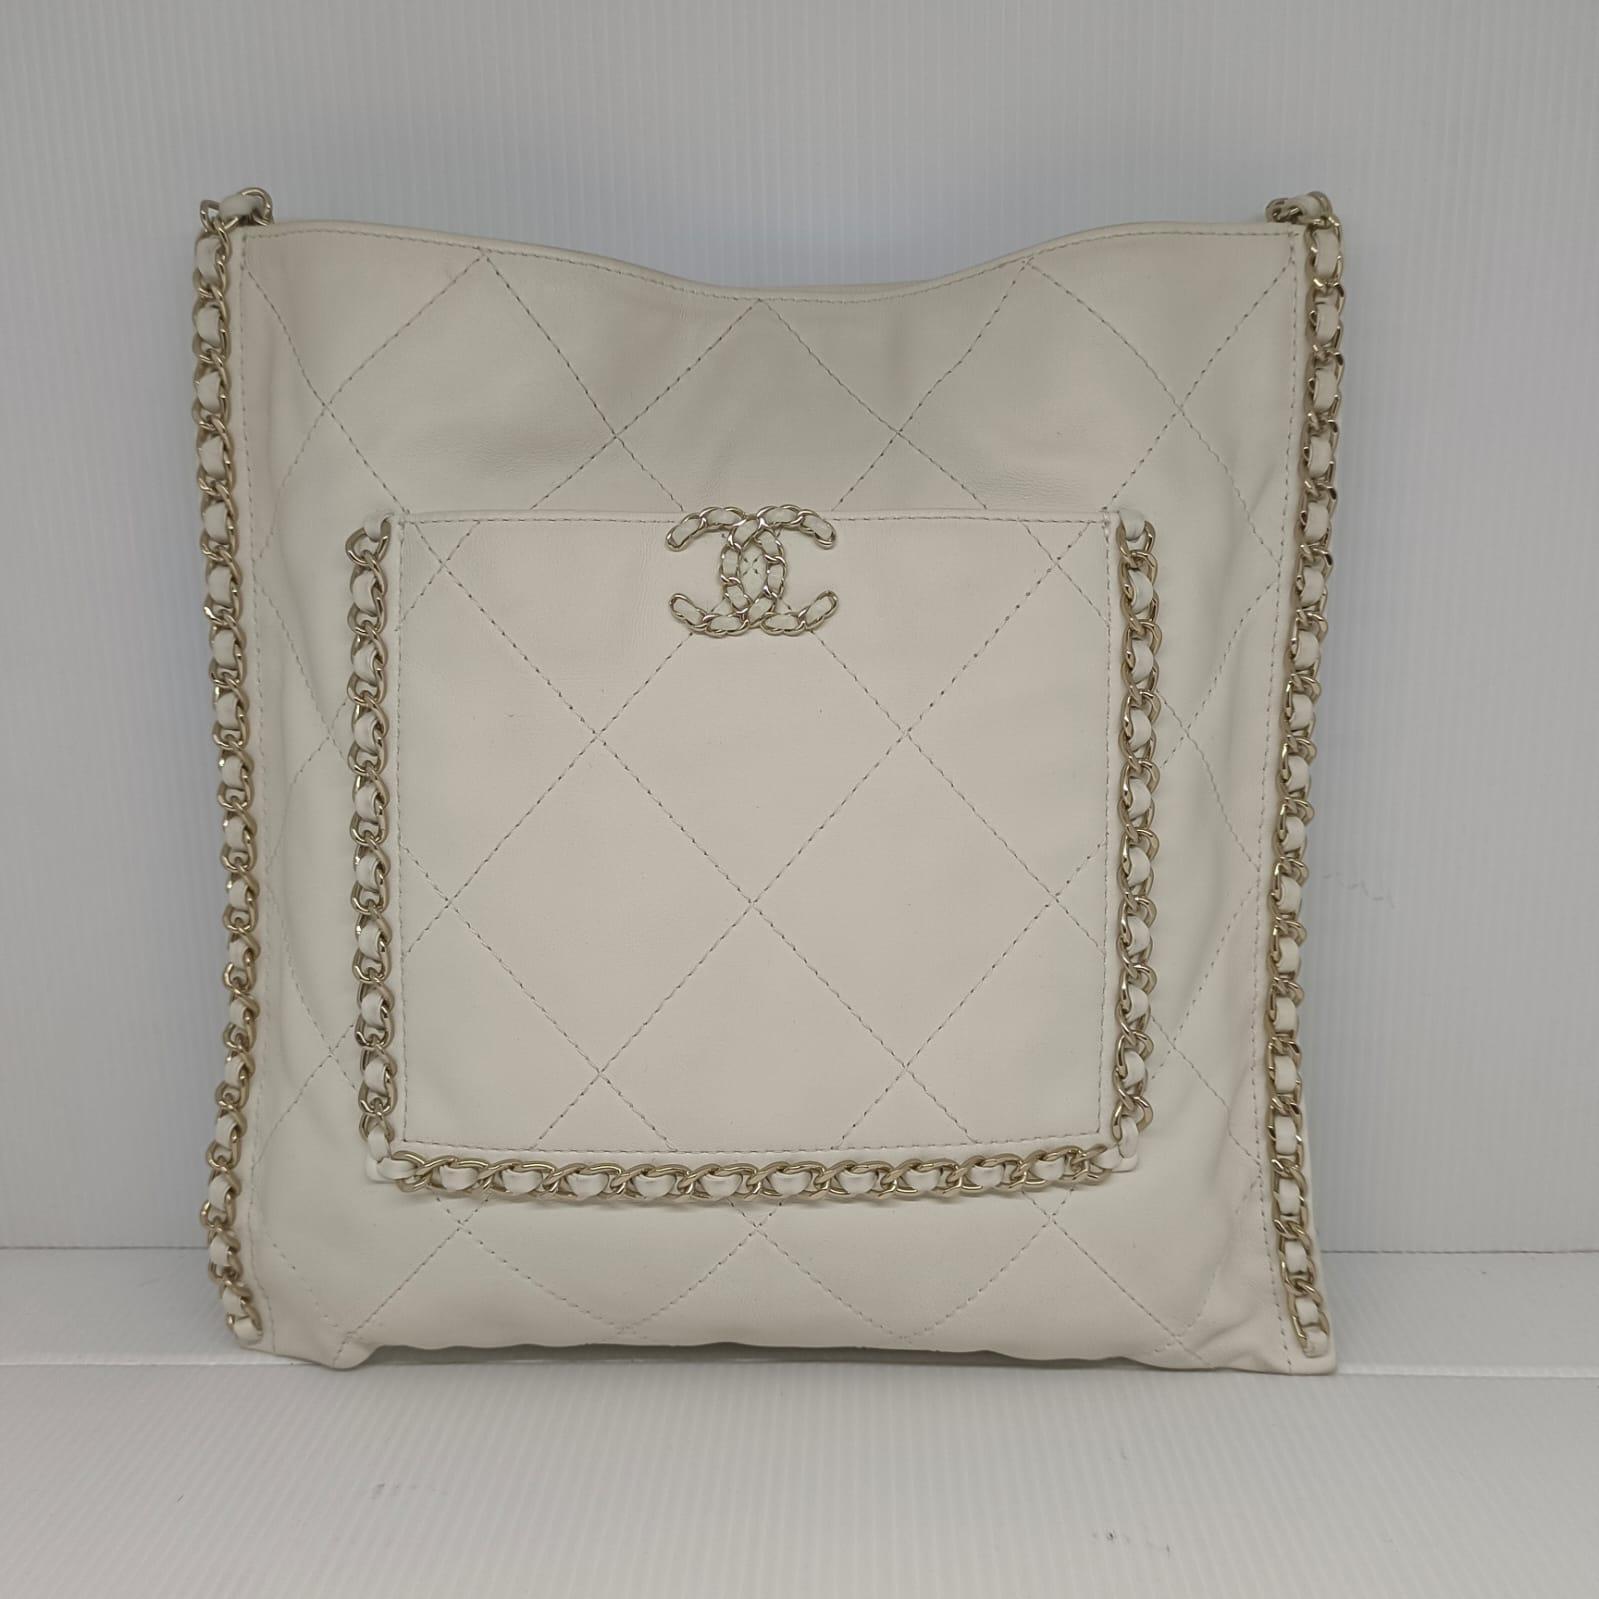 2022 Chanel White Calfskin Quilted Chain Trimmed Flat Tote Bag 6